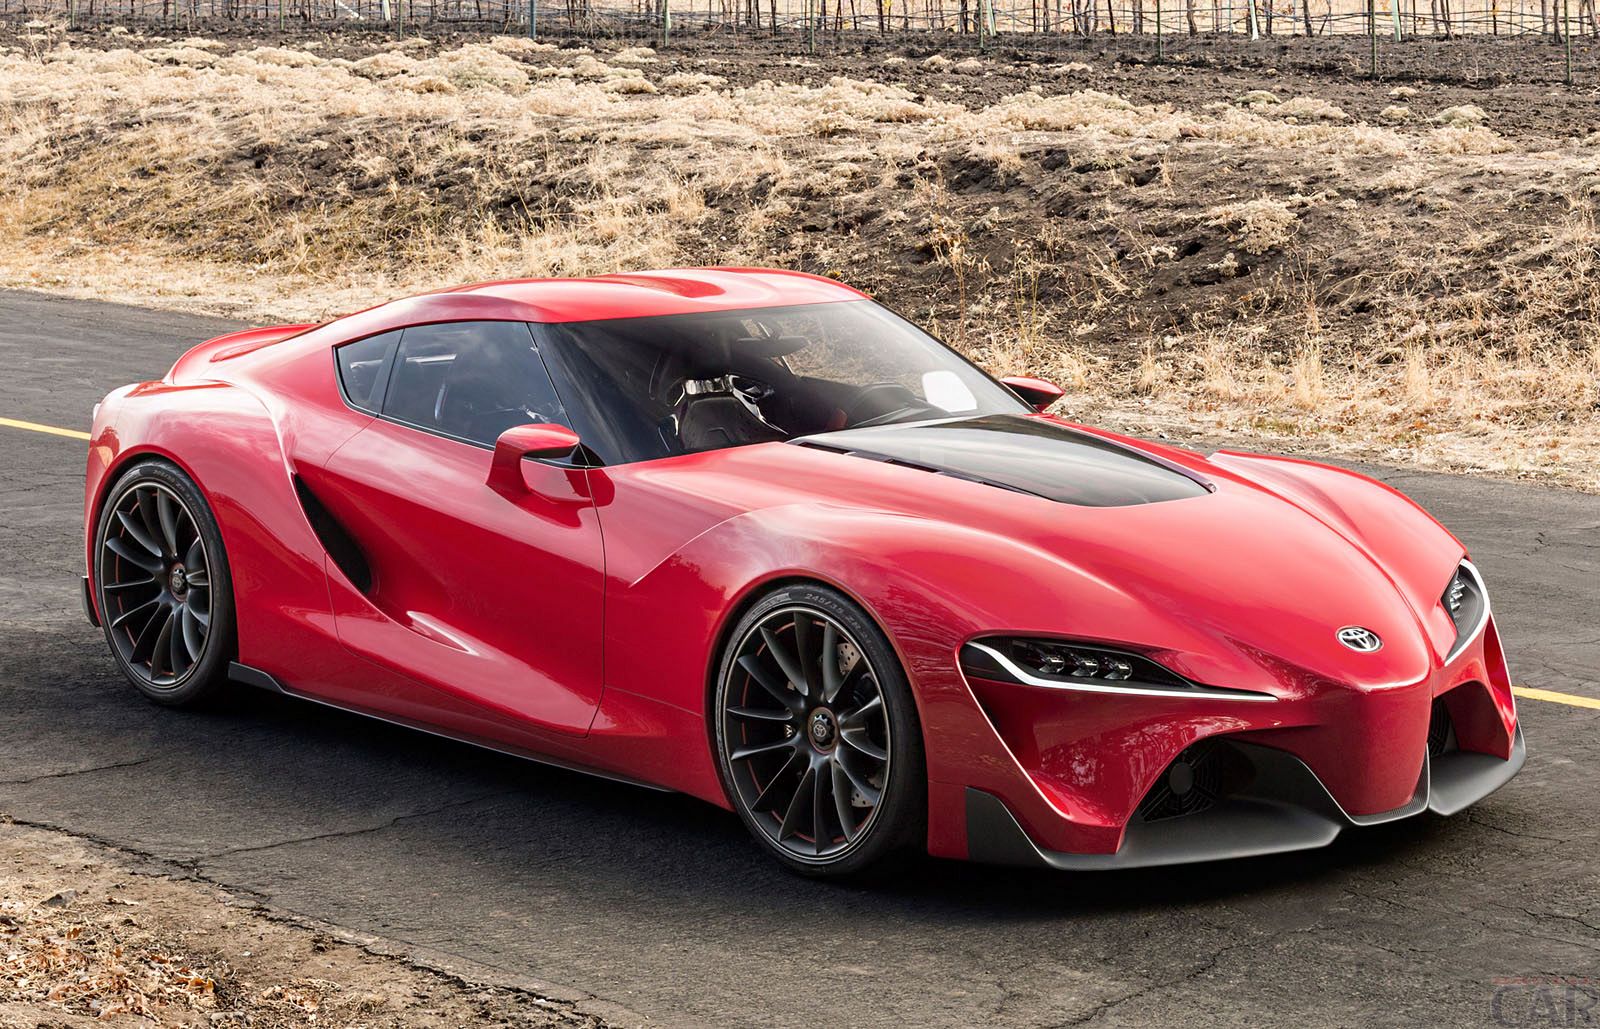 Sports car Toyota FT 1 made of highstrength materials and high crazy 